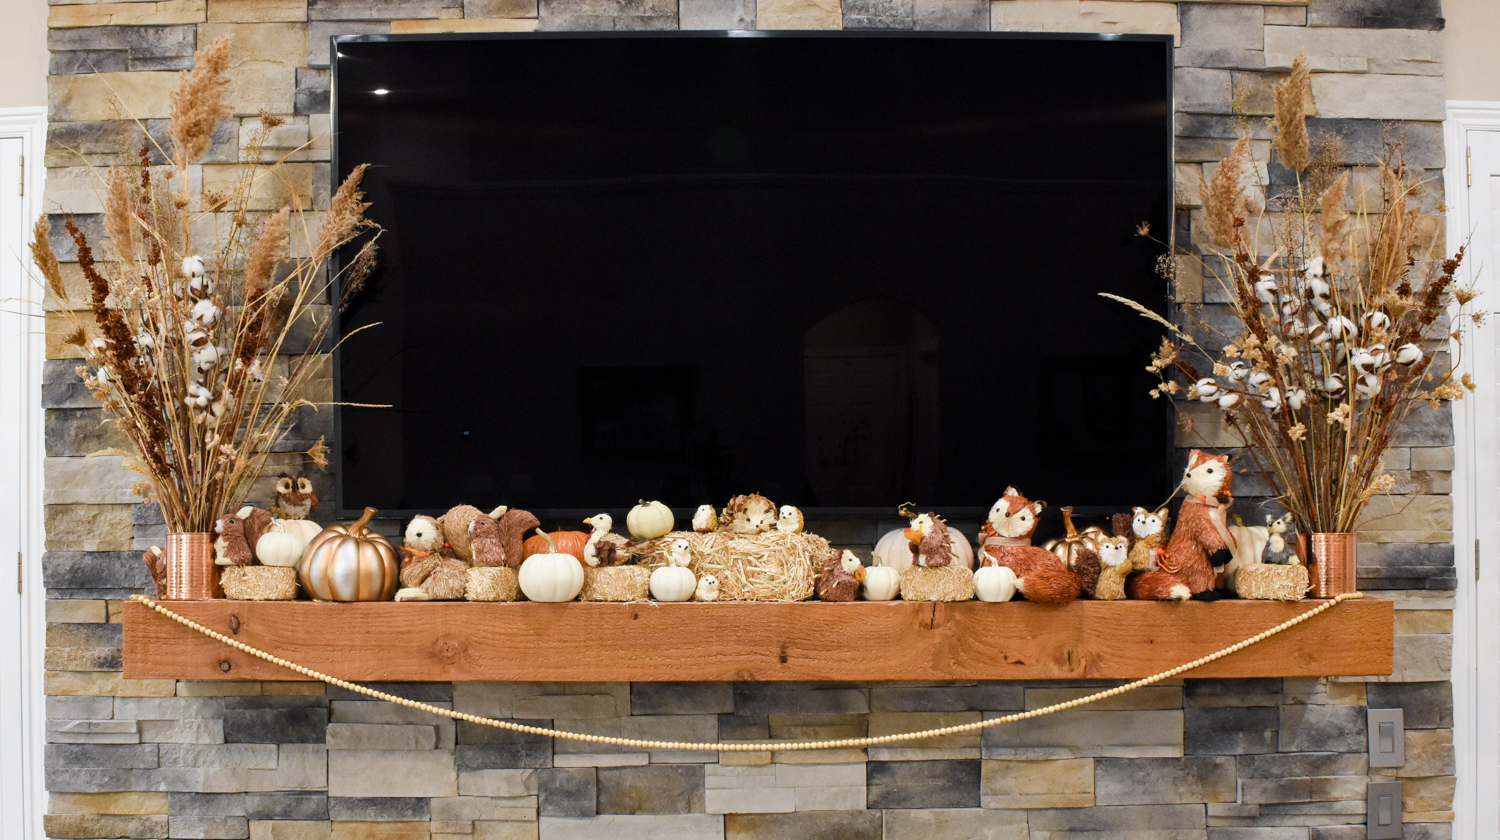 How to Decorate a Mantel for Thanksgiving